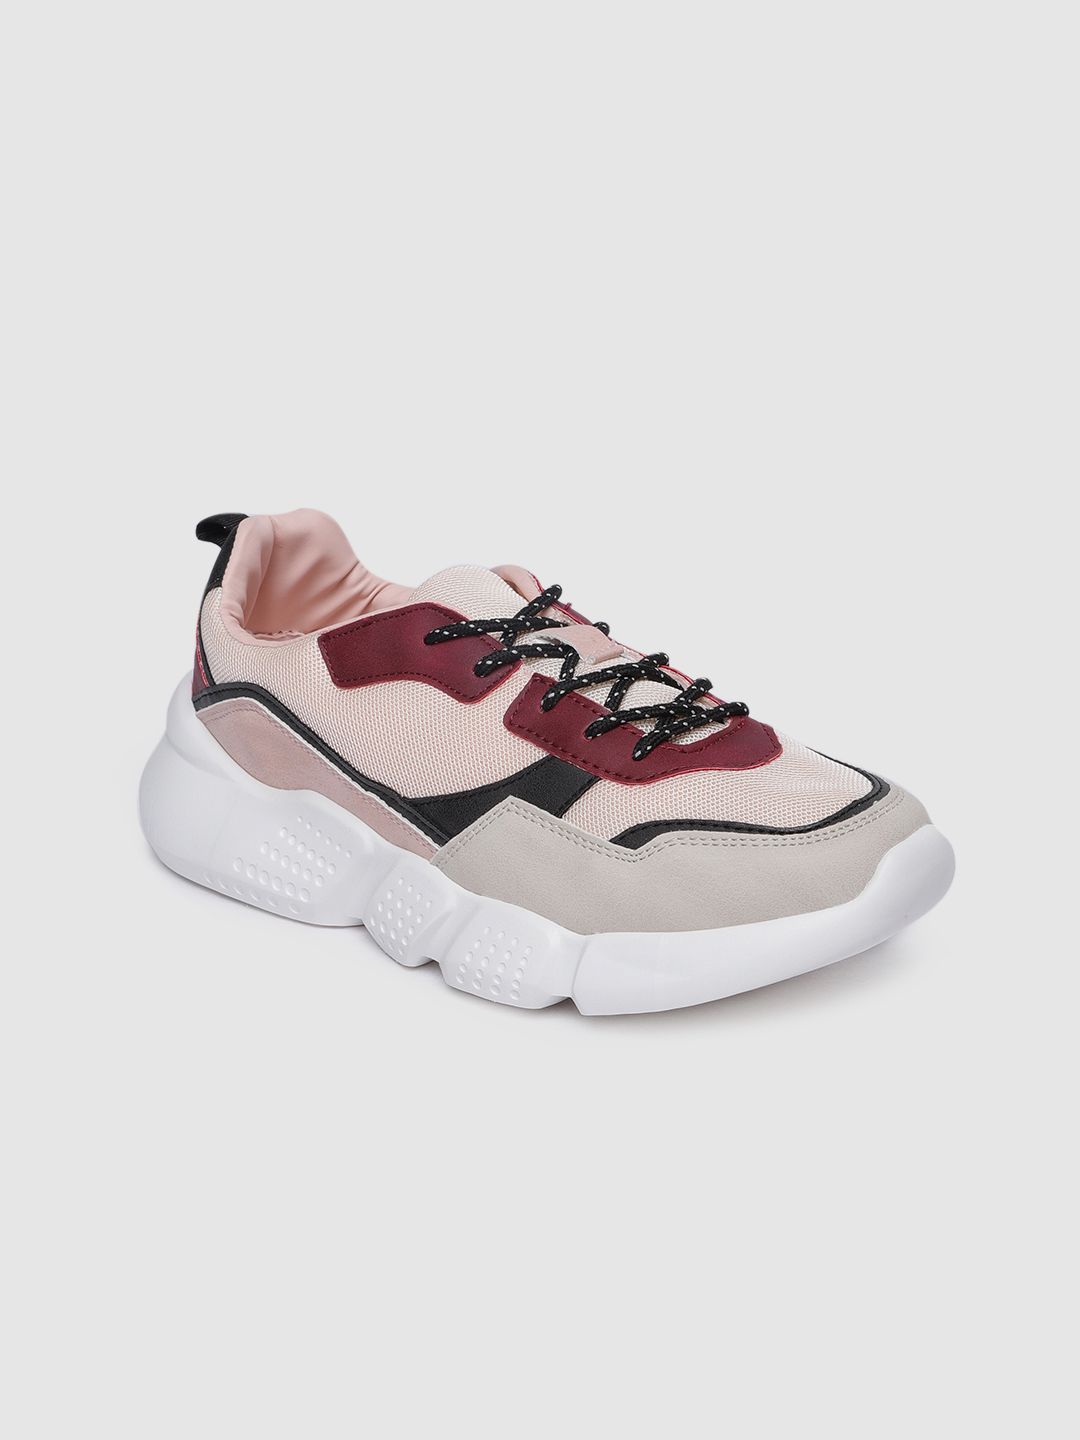 Allen Solly Women Pink & Red Sneakers Price in India